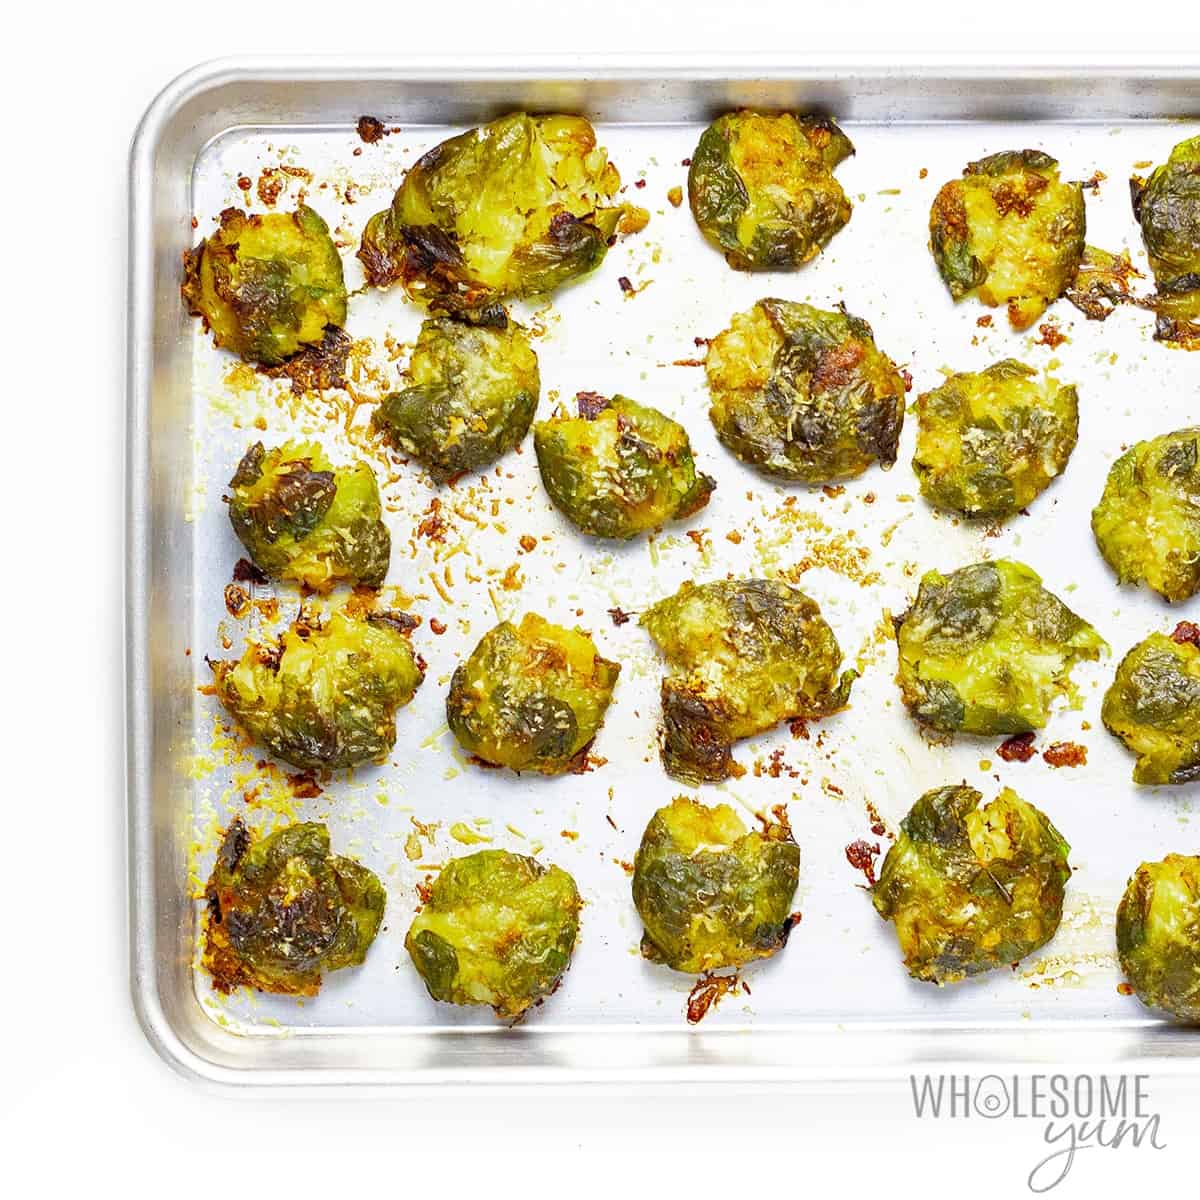 Roasted smashed brussels sprouts in baking pan.